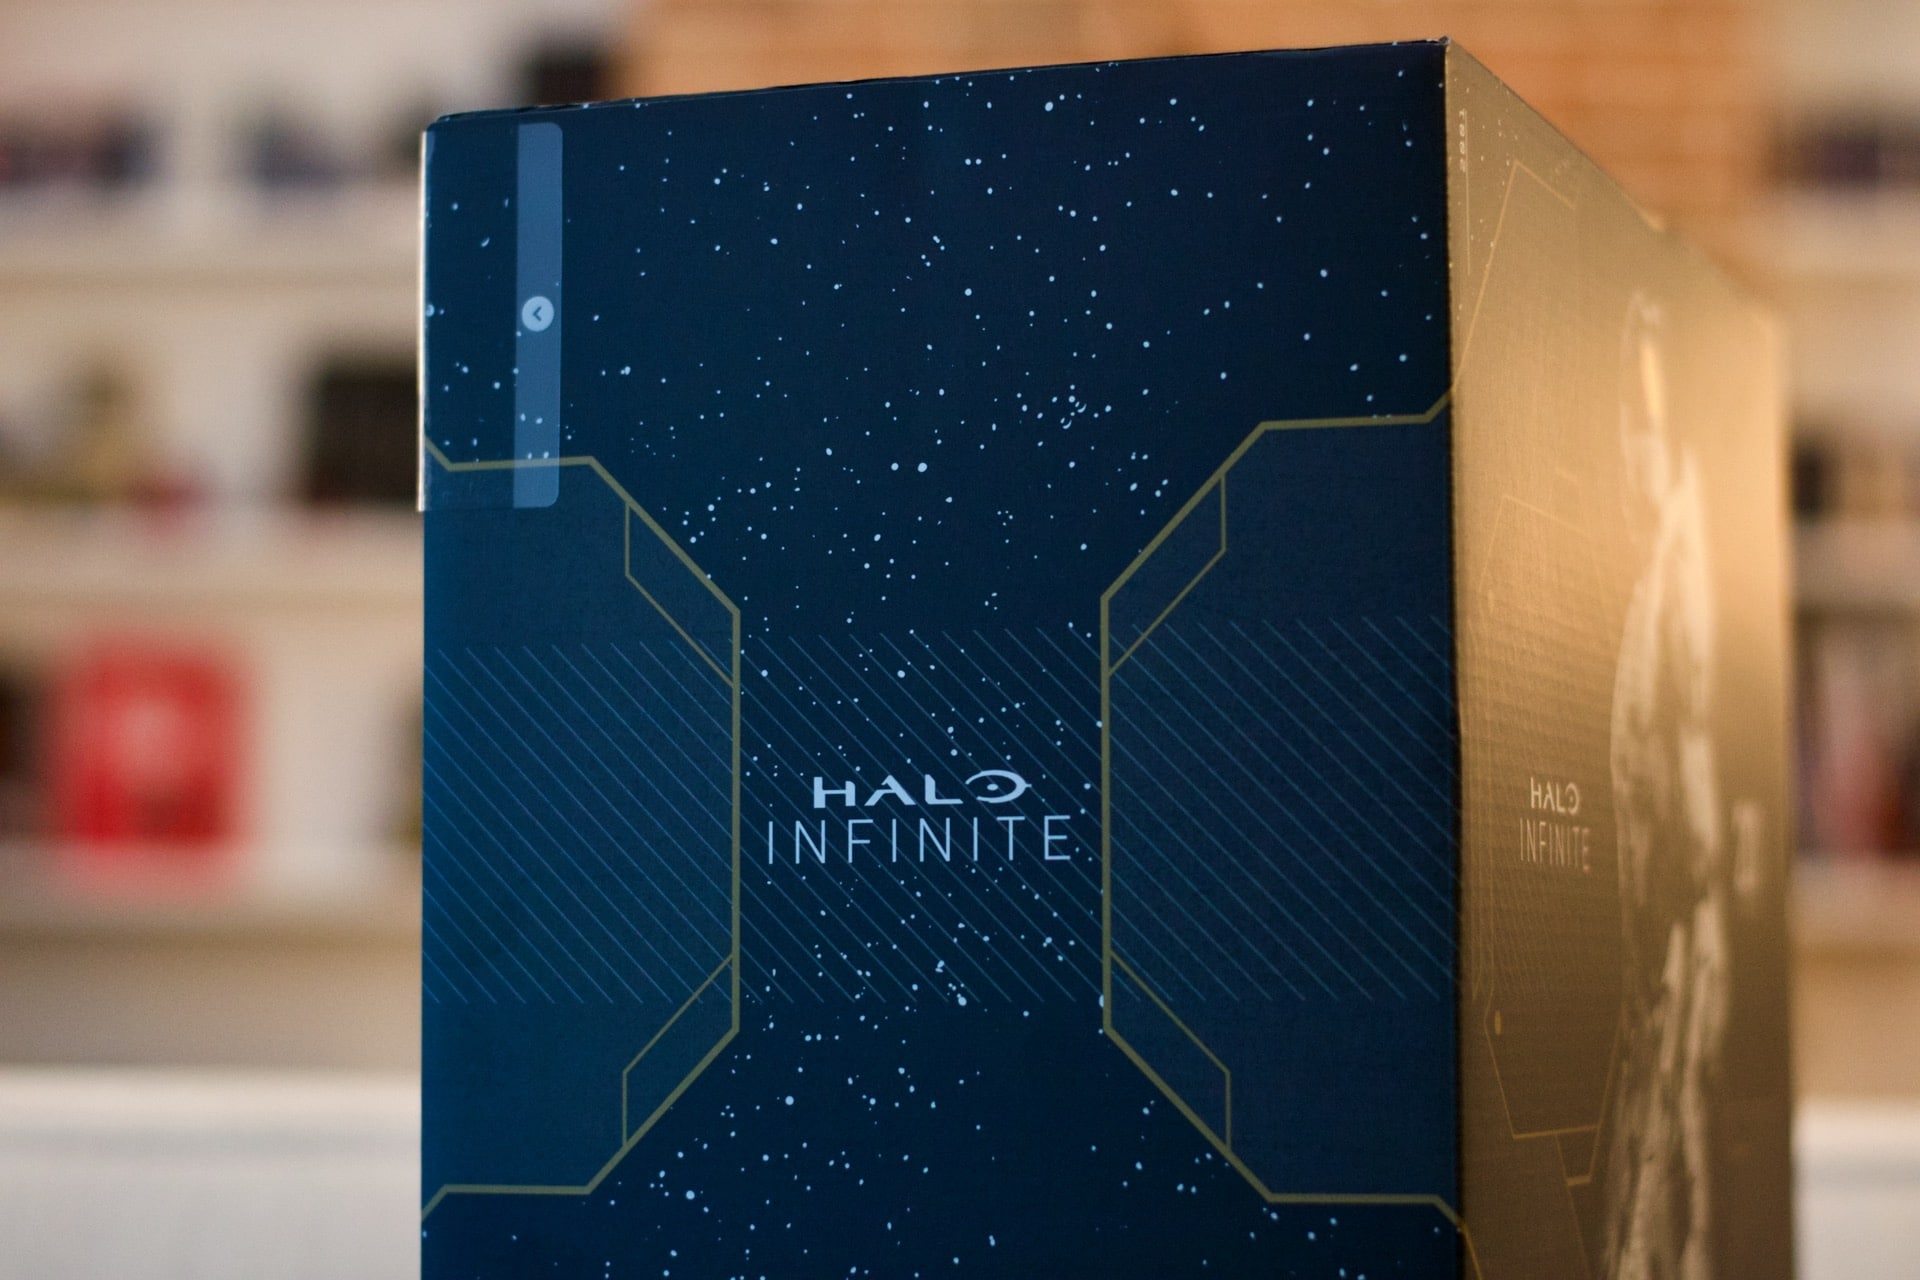 Unboxing Xbox Series X Halo Infinite Console